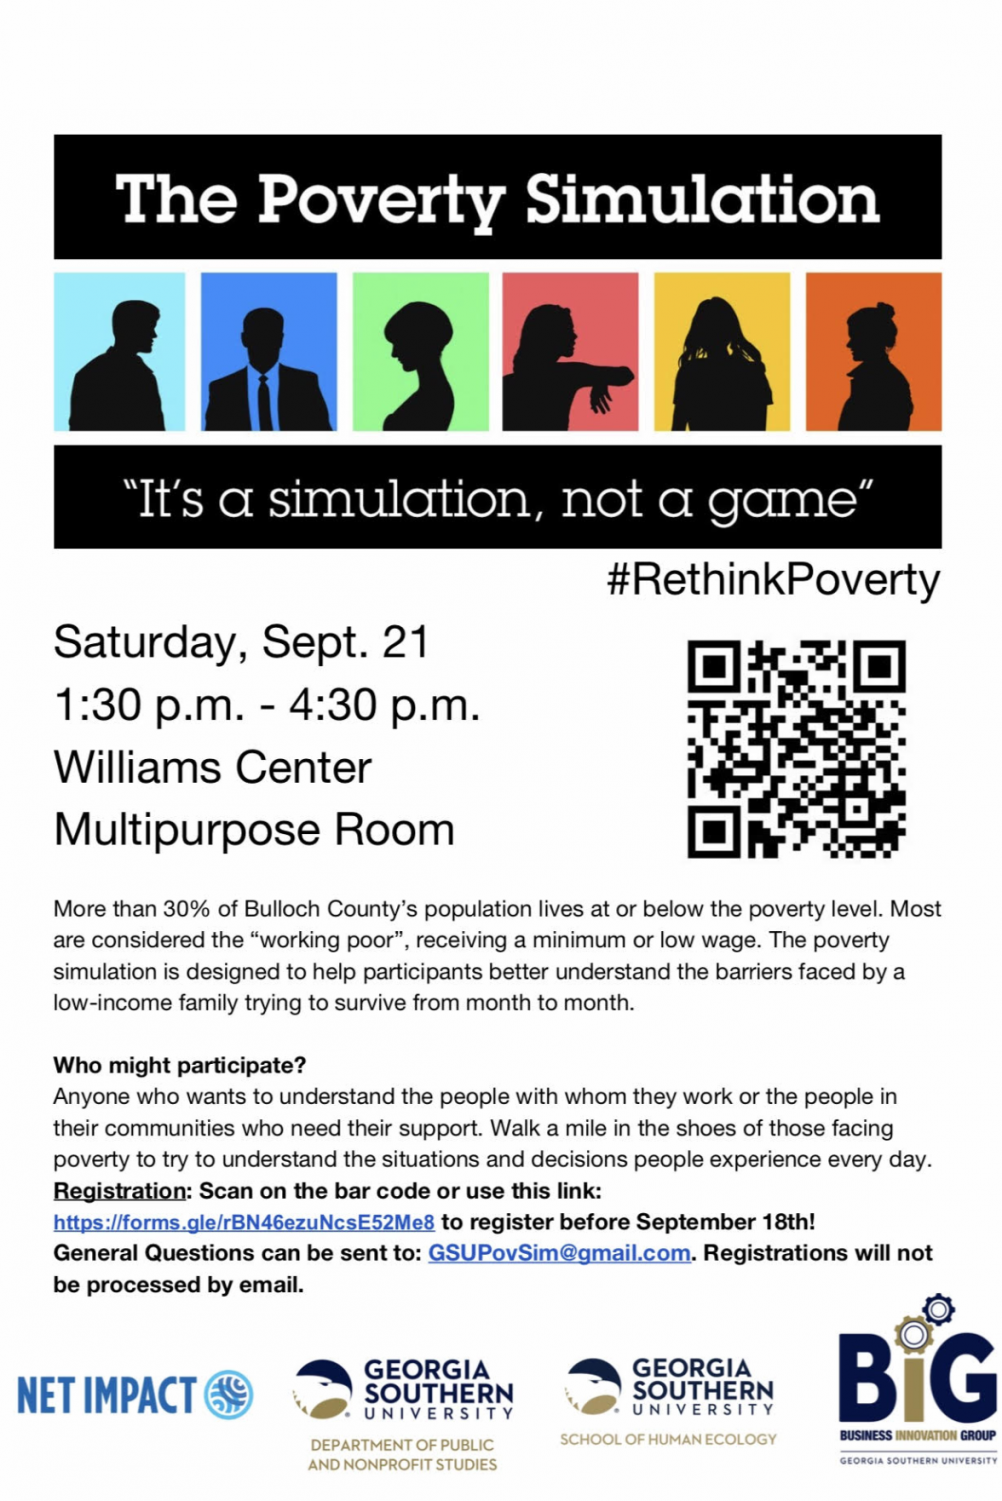 Poverty+Simulation+to+be+held+at+Georgia+Southern+on+Sept.+21